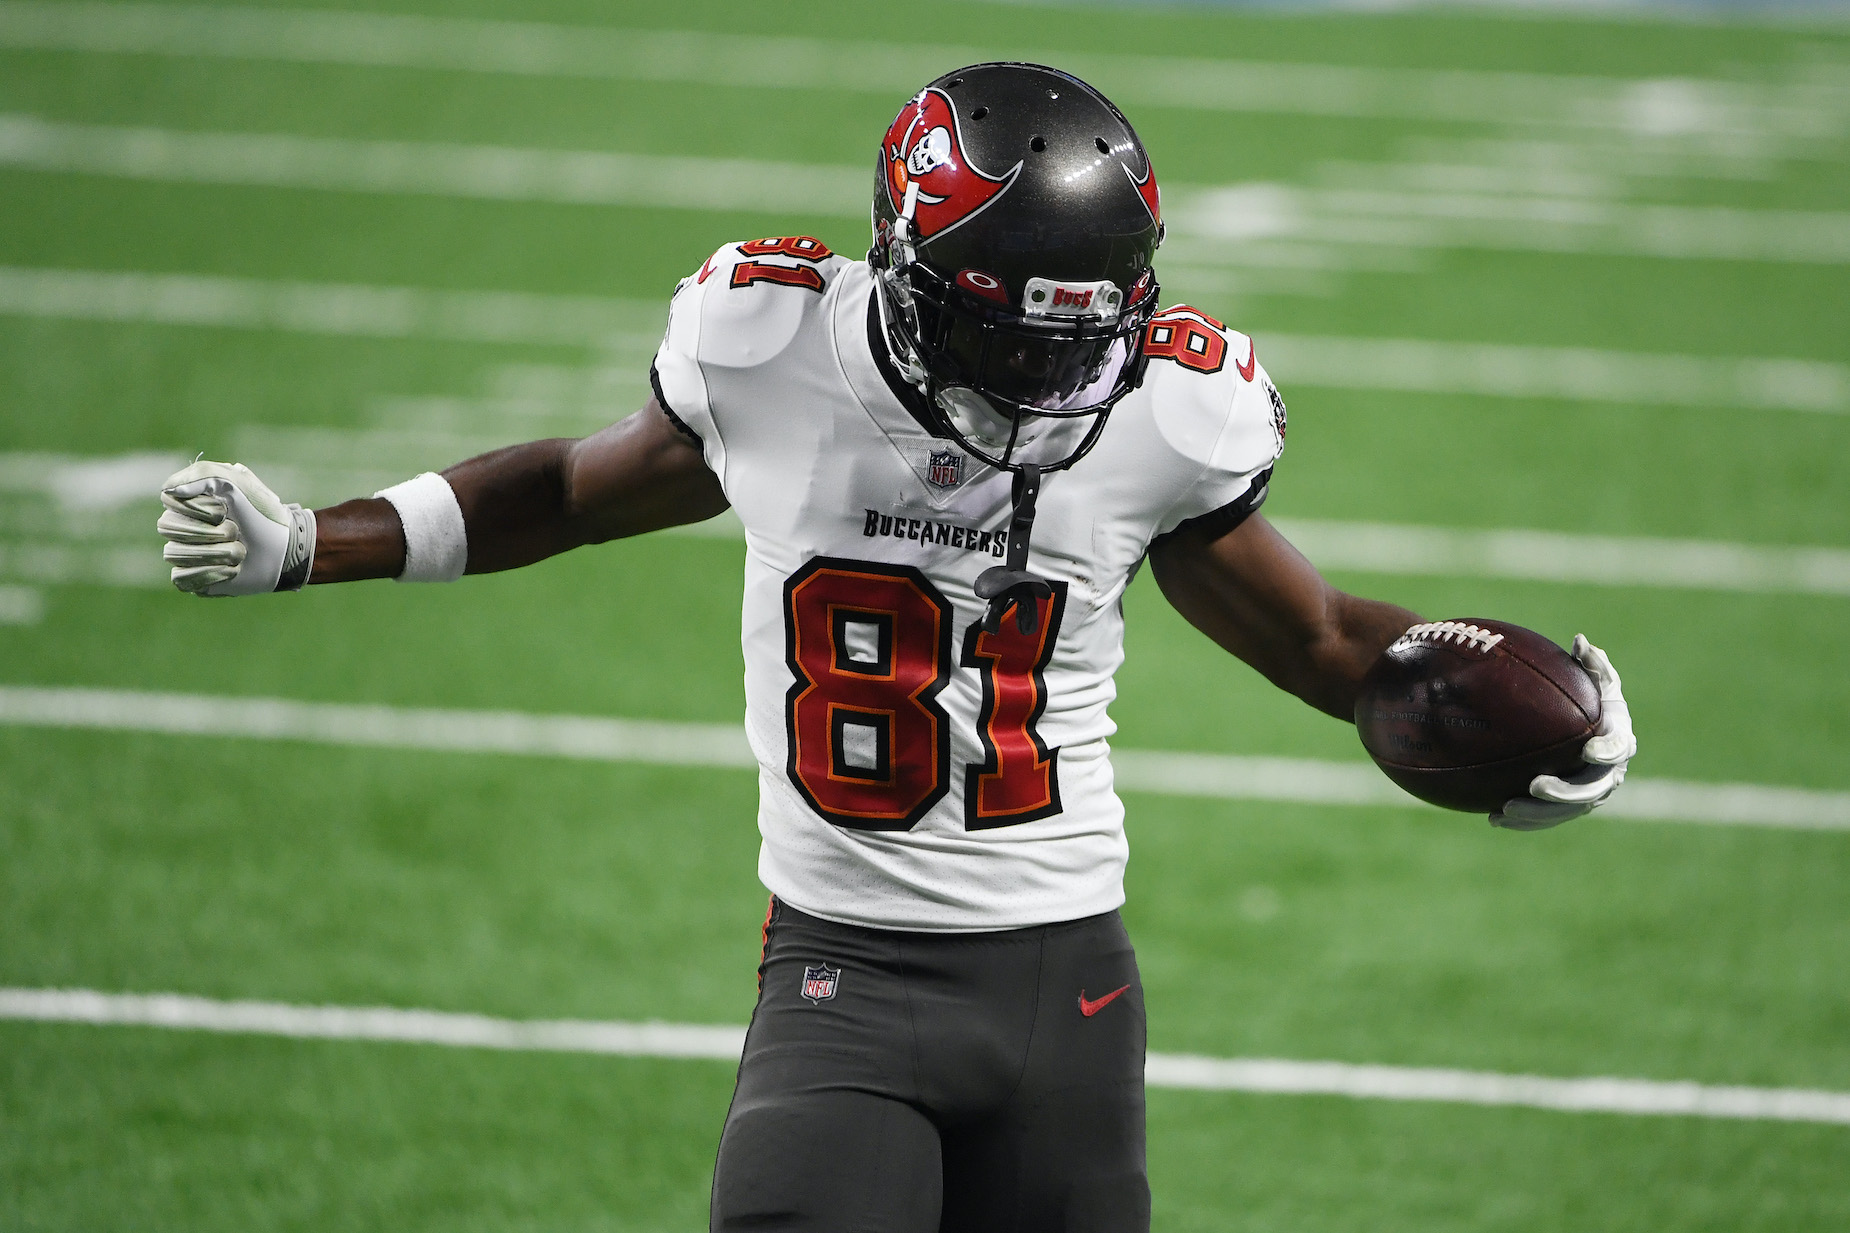 Tampa Bay Buccaneers receiver Antonio Brown was accused of rape and sexual assault in 2020